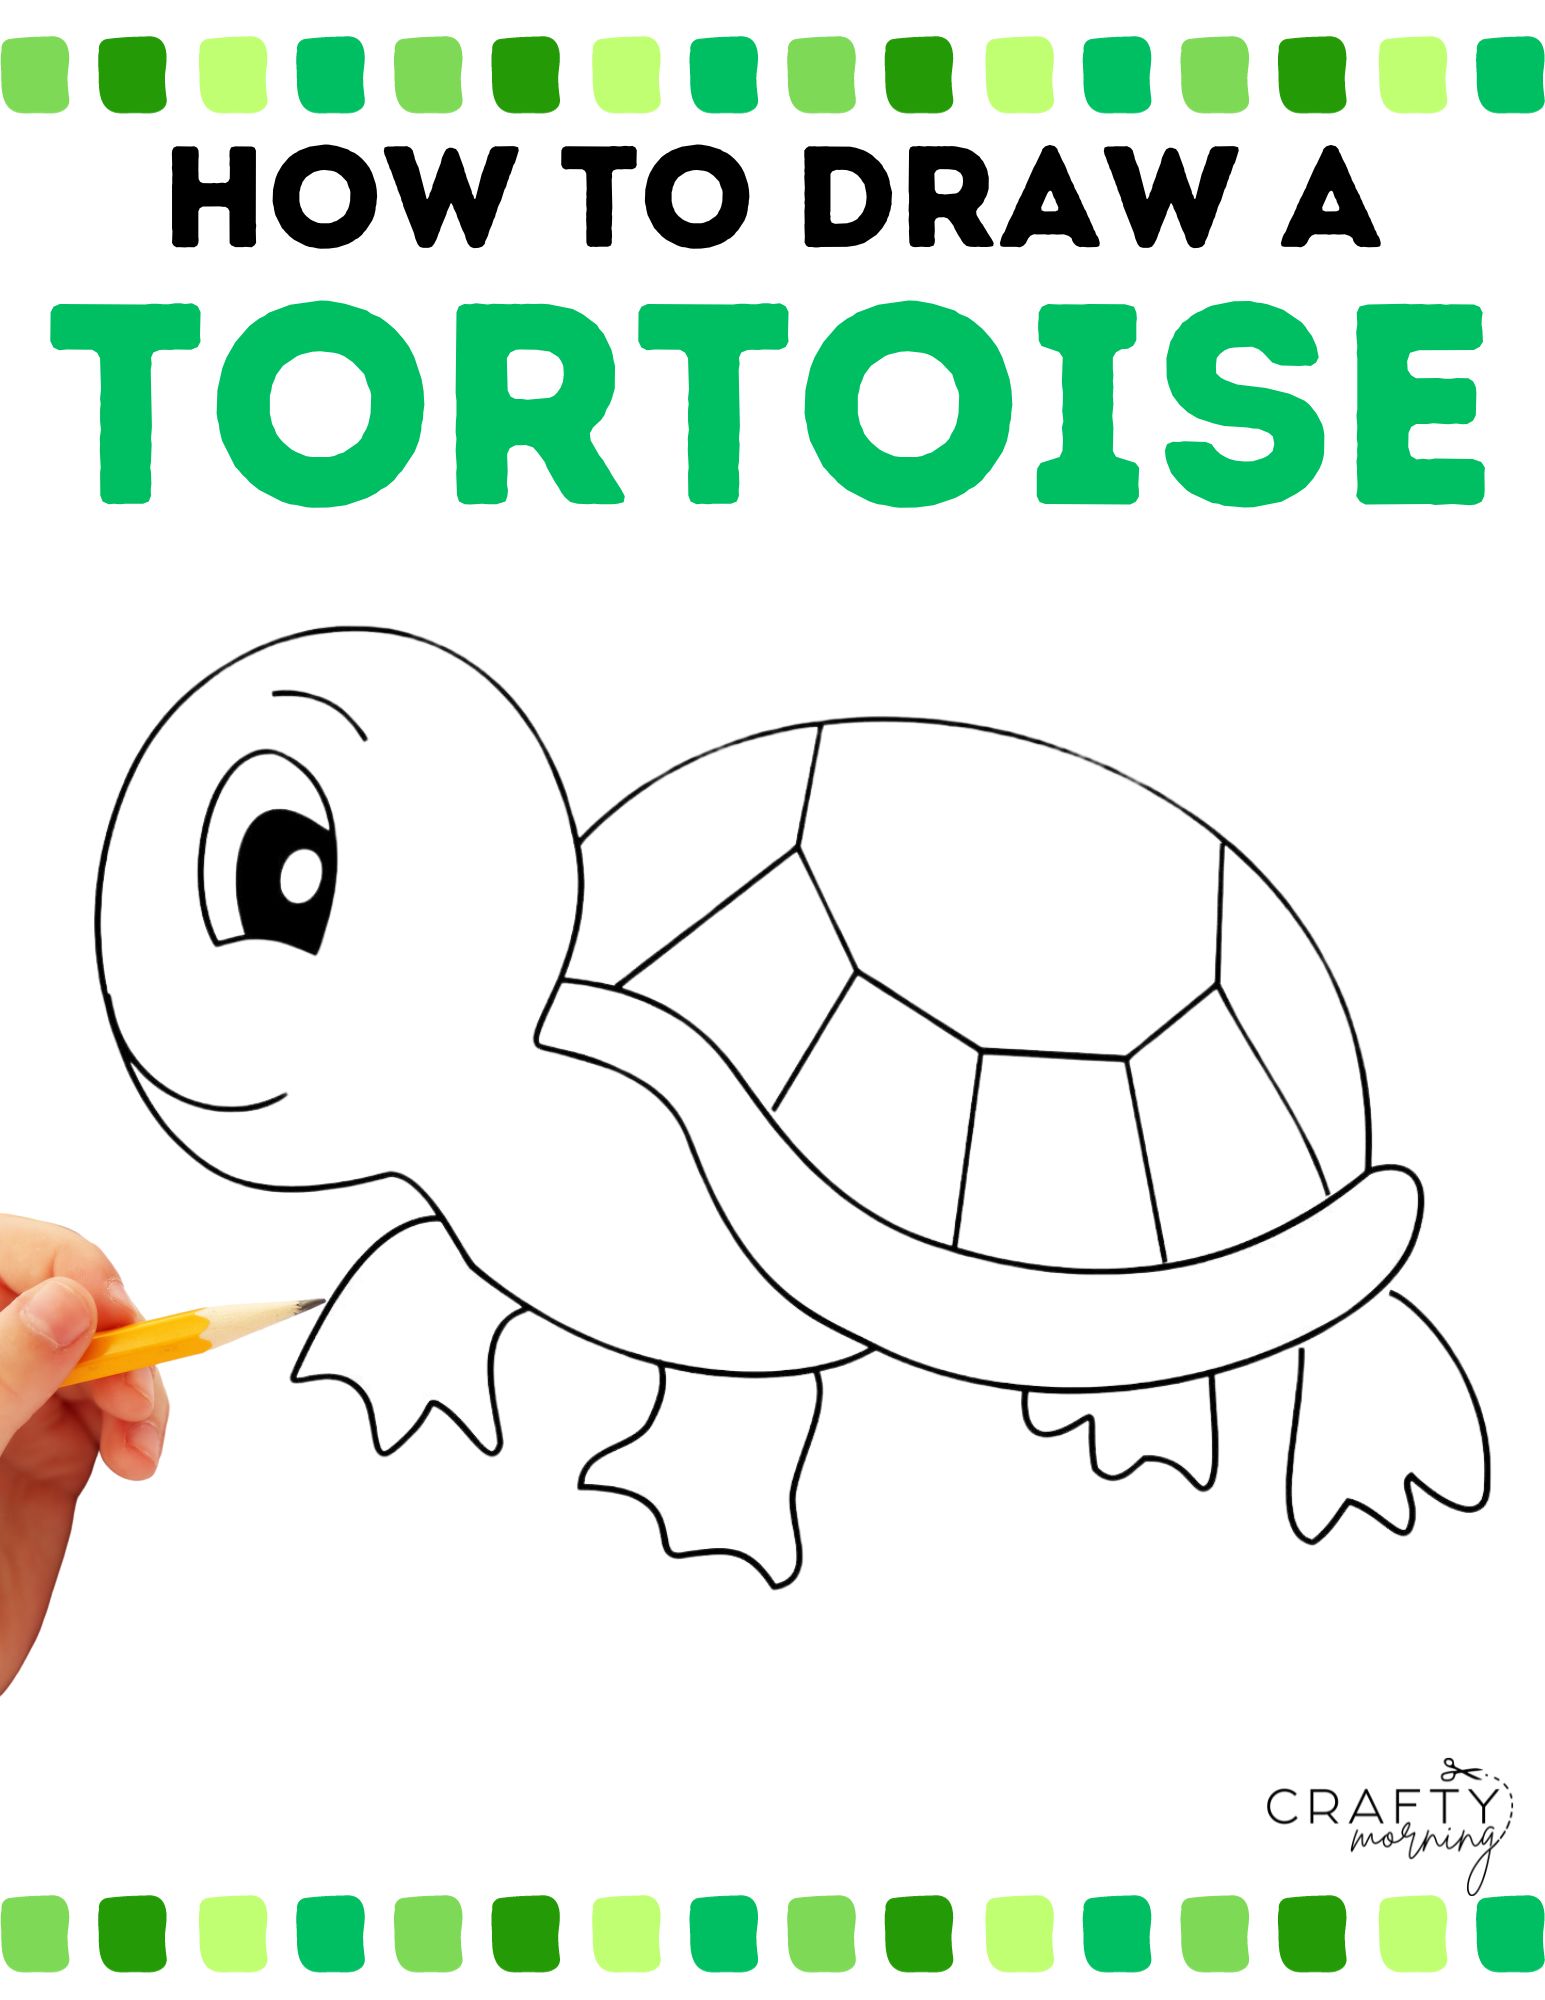 Summer Tortoise Playing Coloring Page for Kids - Stock Illustration  [99069894] - PIXTA